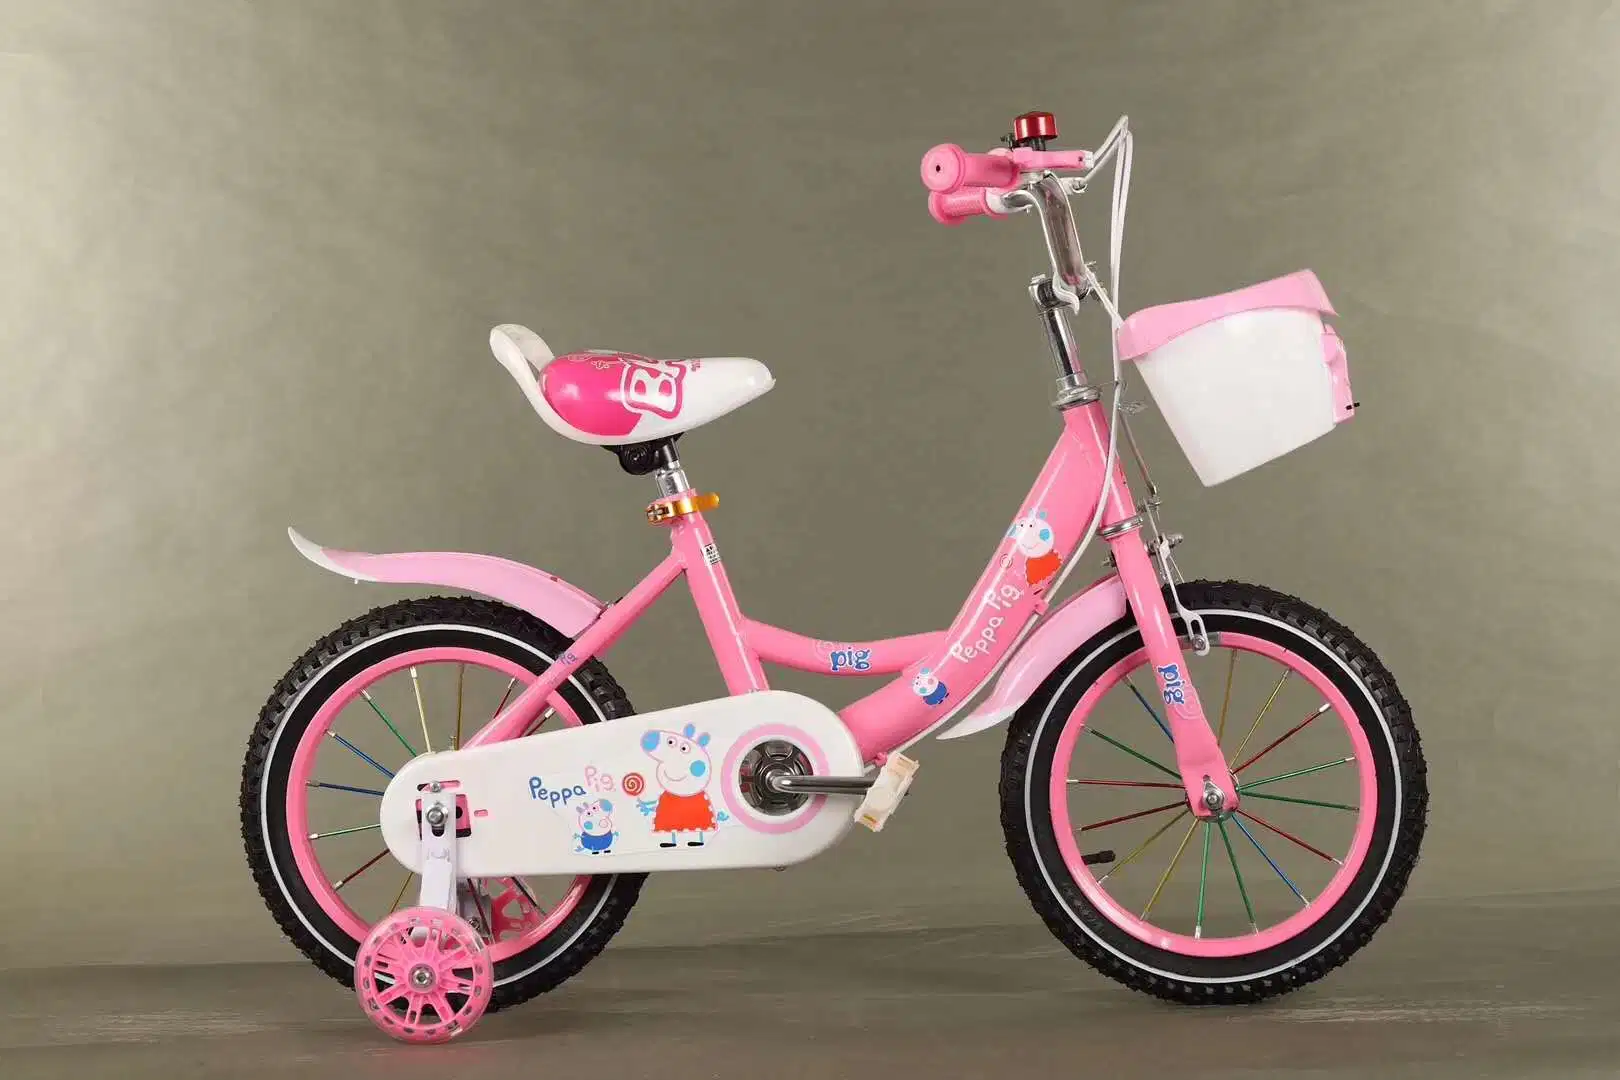 BMX Bicycle for Children Ride on Bike Color Design New Model 2020